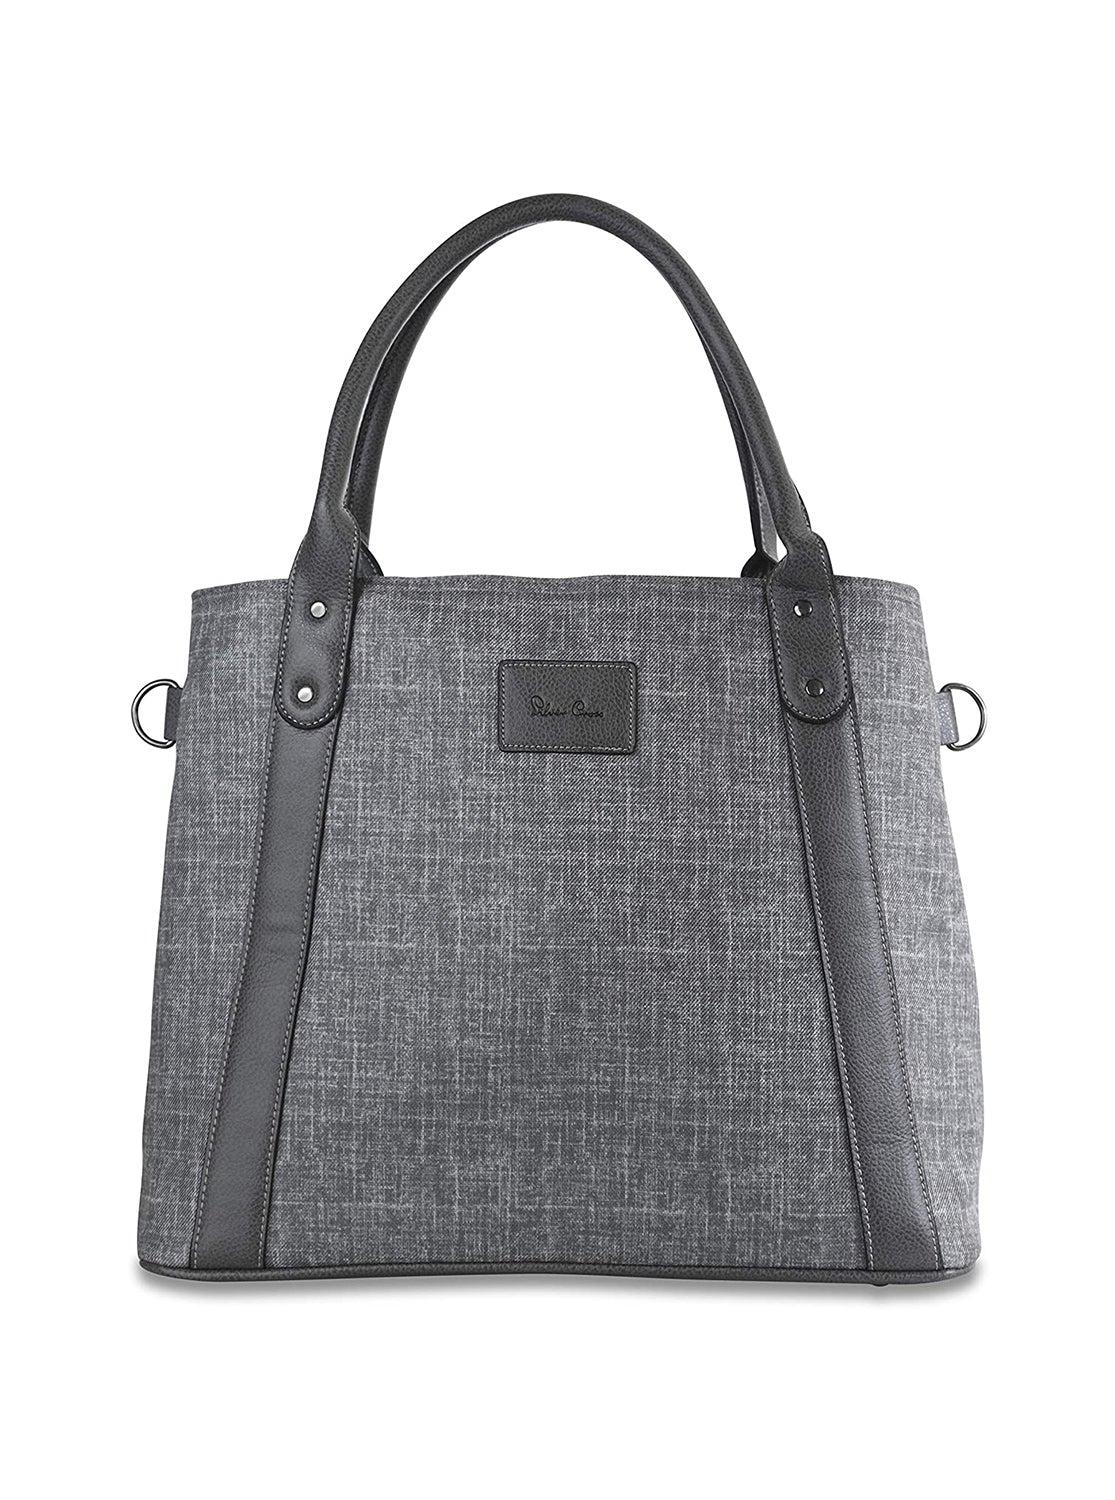 SILVER CROSS Coast Changing Bag - ANB Baby -$100 - $300